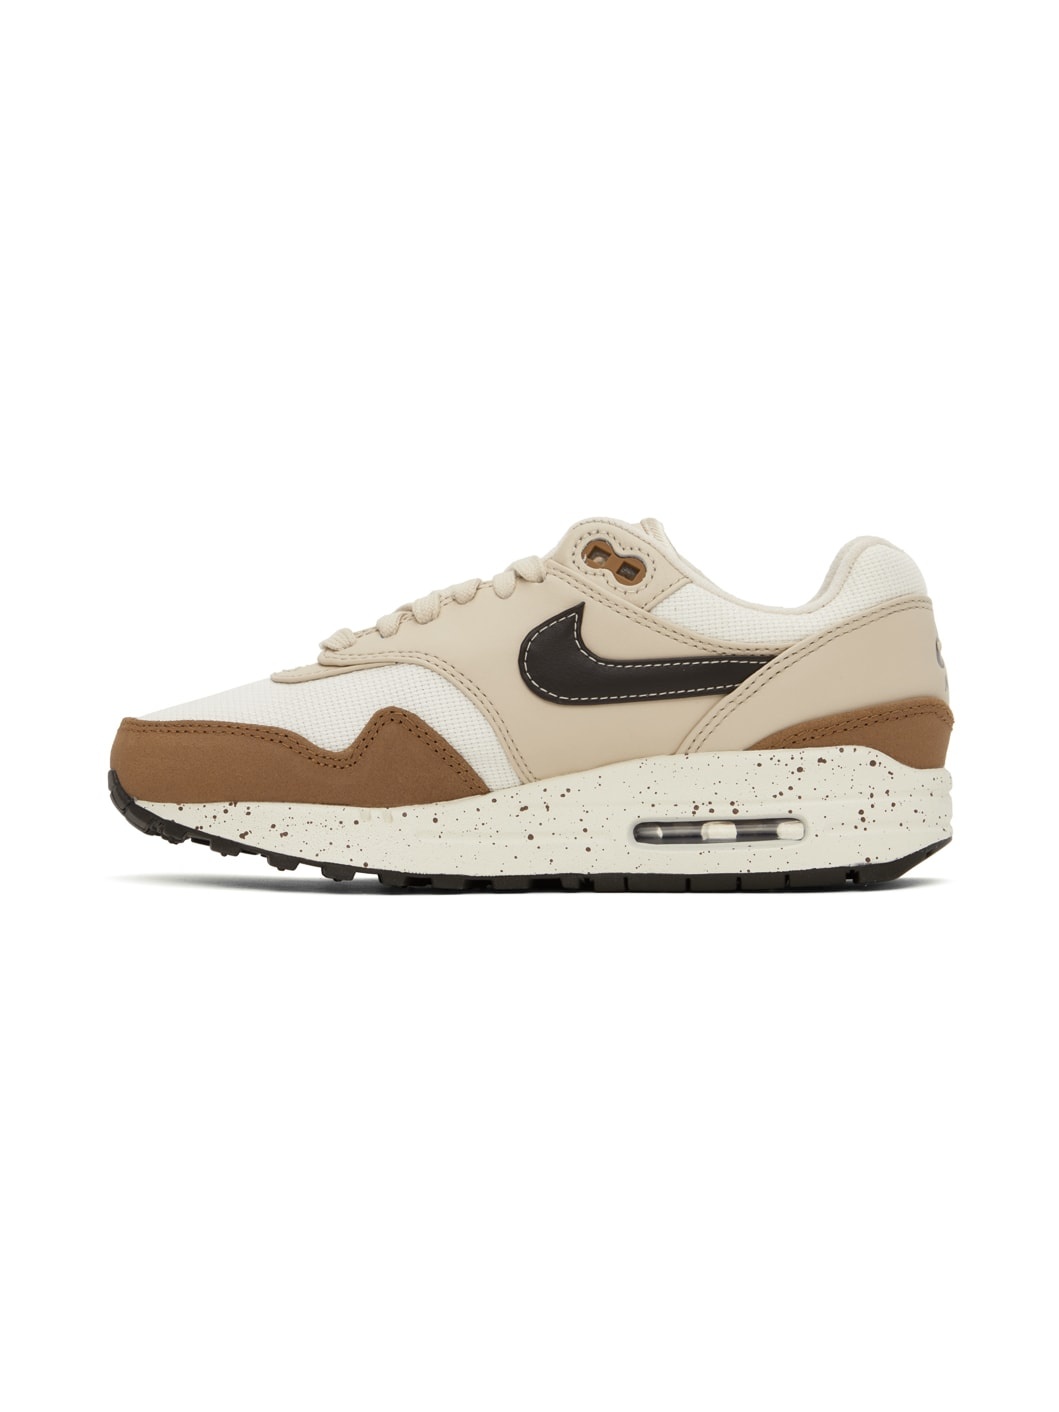 White & Brown Air Max 1 '87 Sneakers - 3